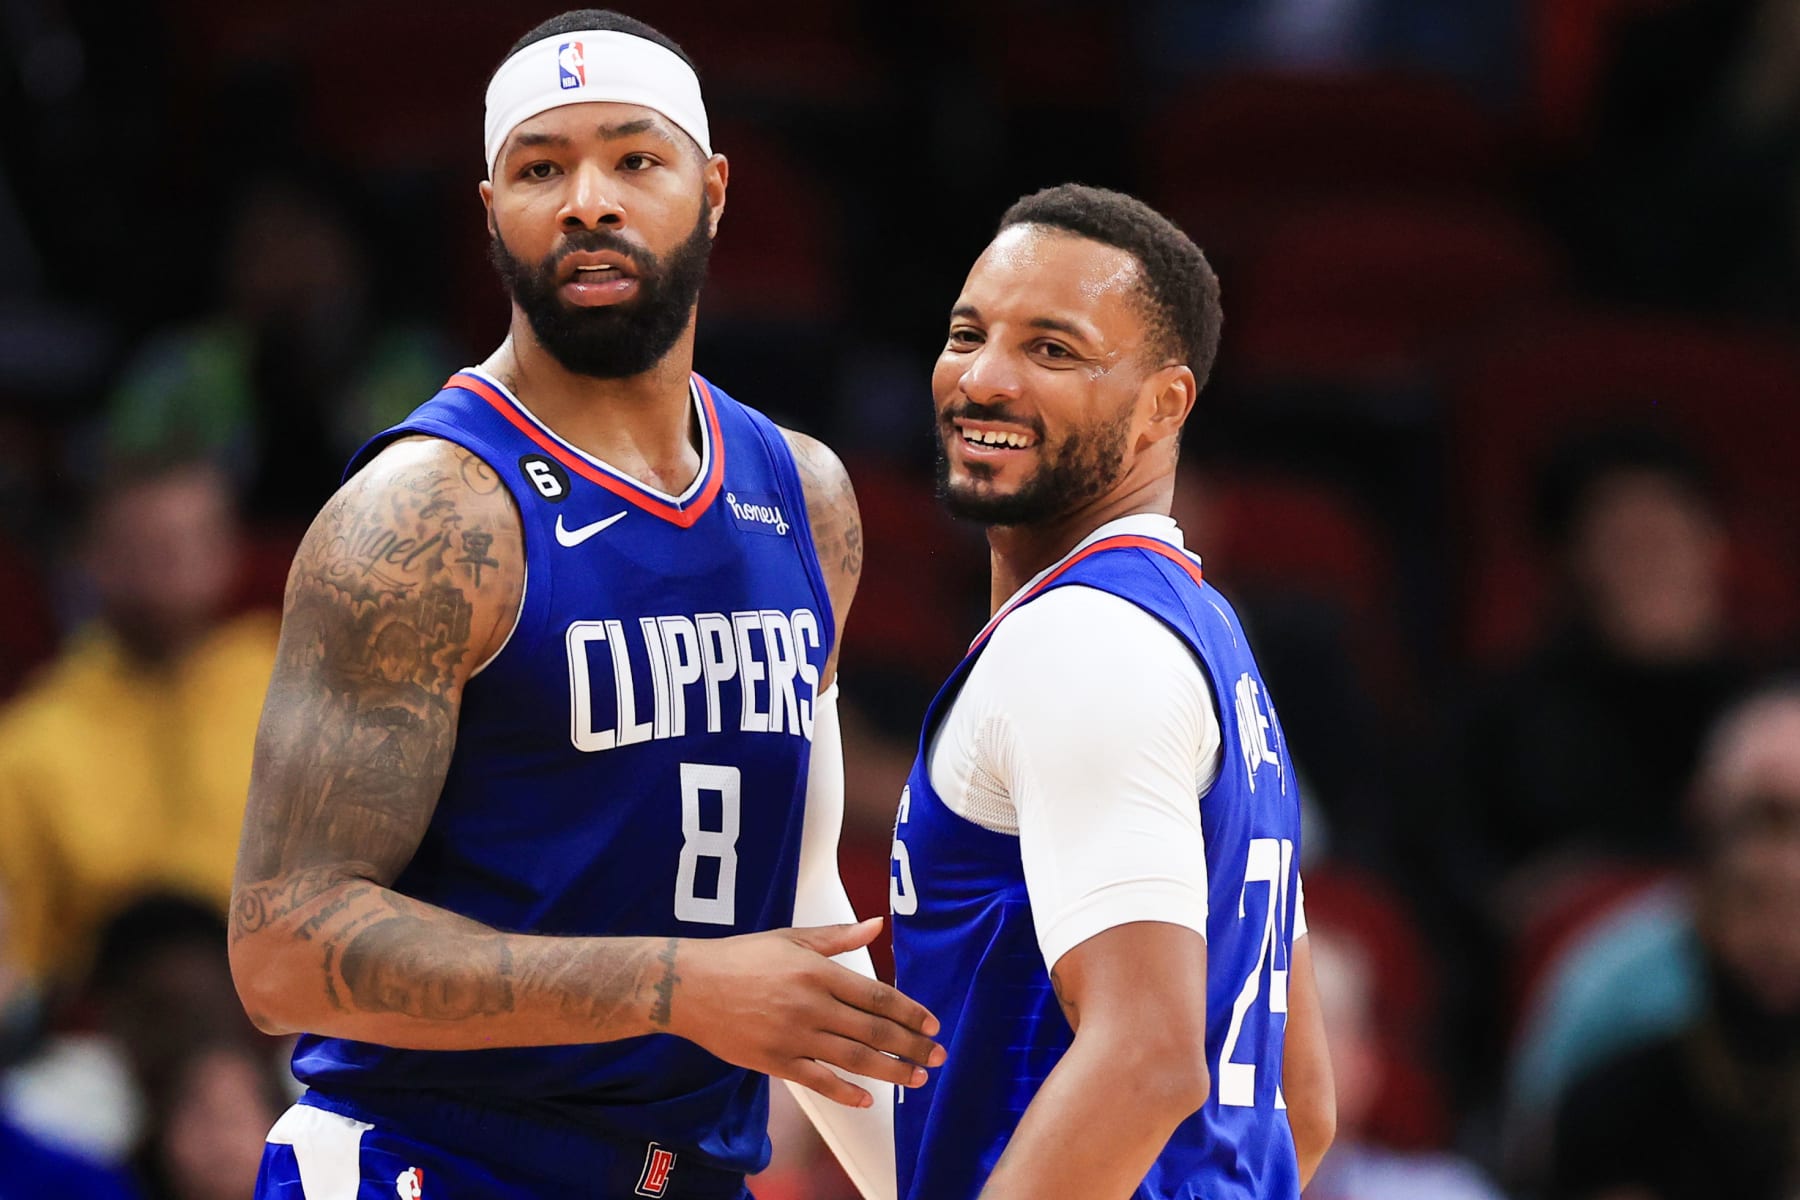 Norman Powell, Marcus Harris, Clippers' Norman Powell, and Marcus Harris Trade To Jazz In Bold Proposal